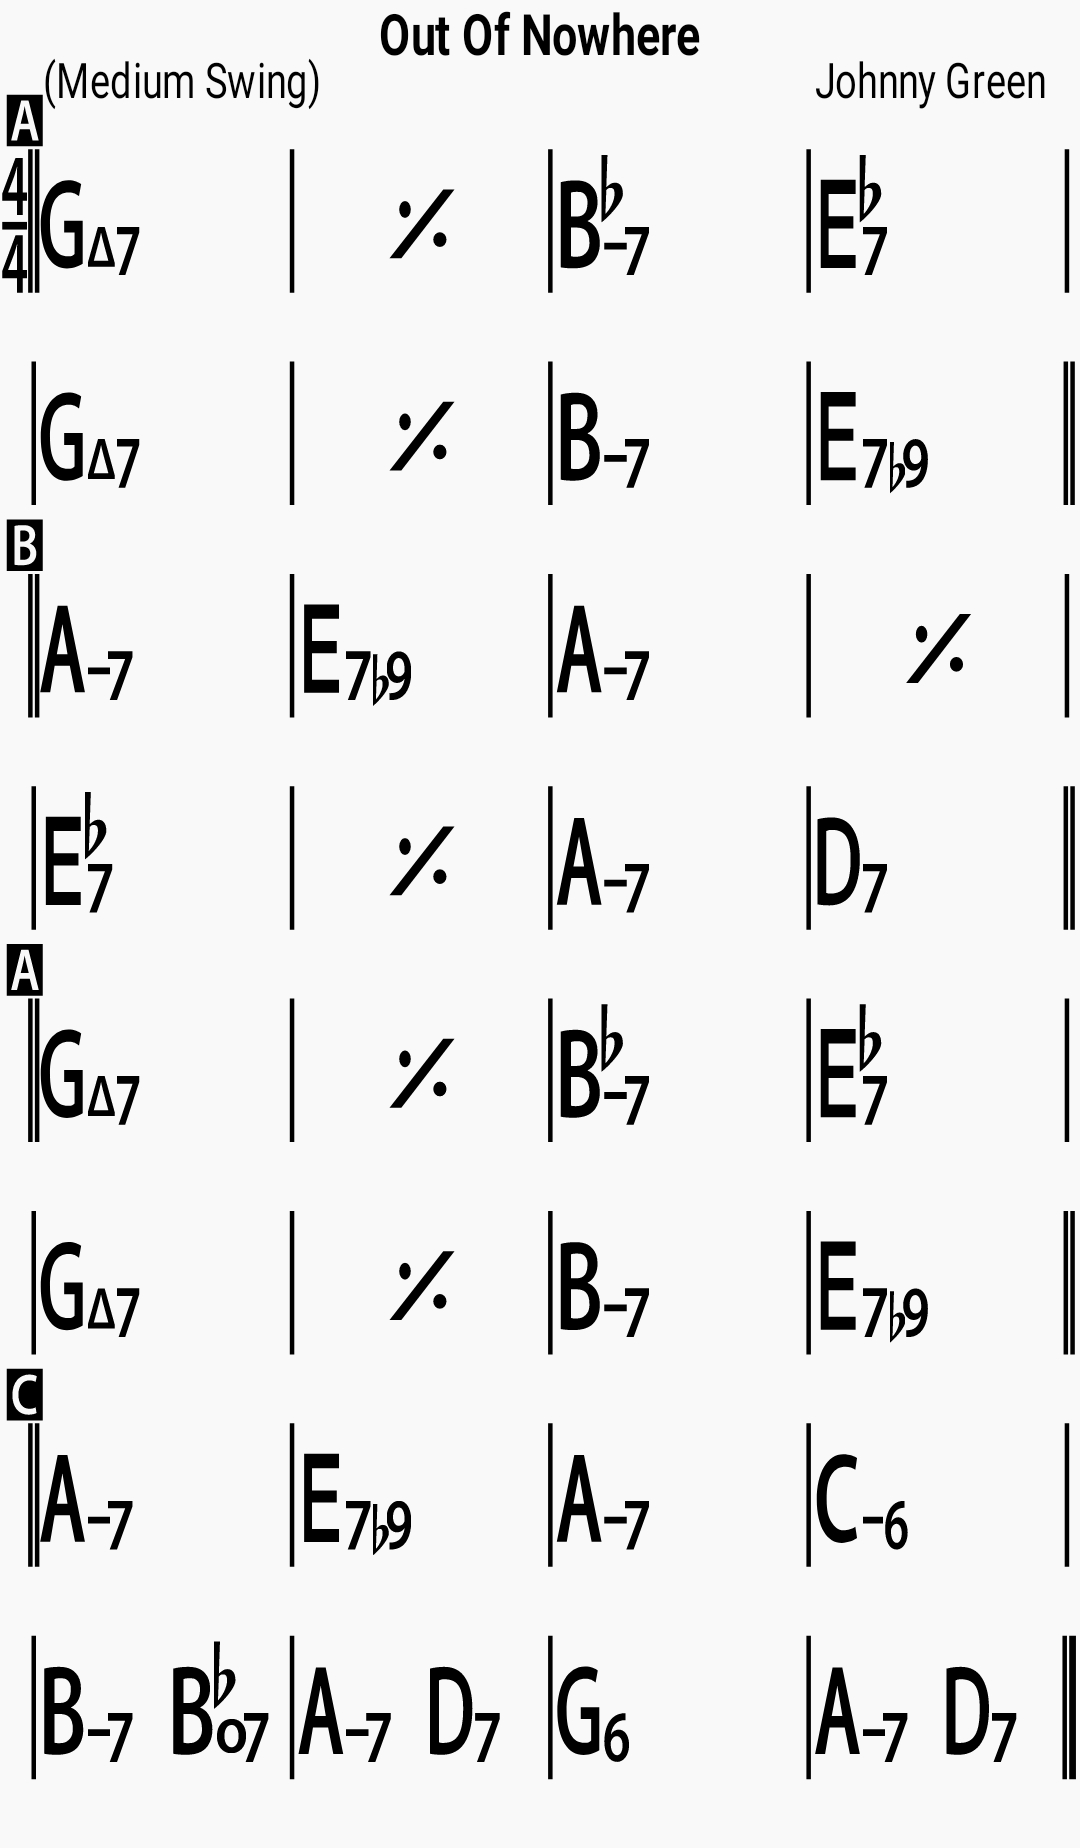 Chord chart for the jazz standard Out Of Nowhere